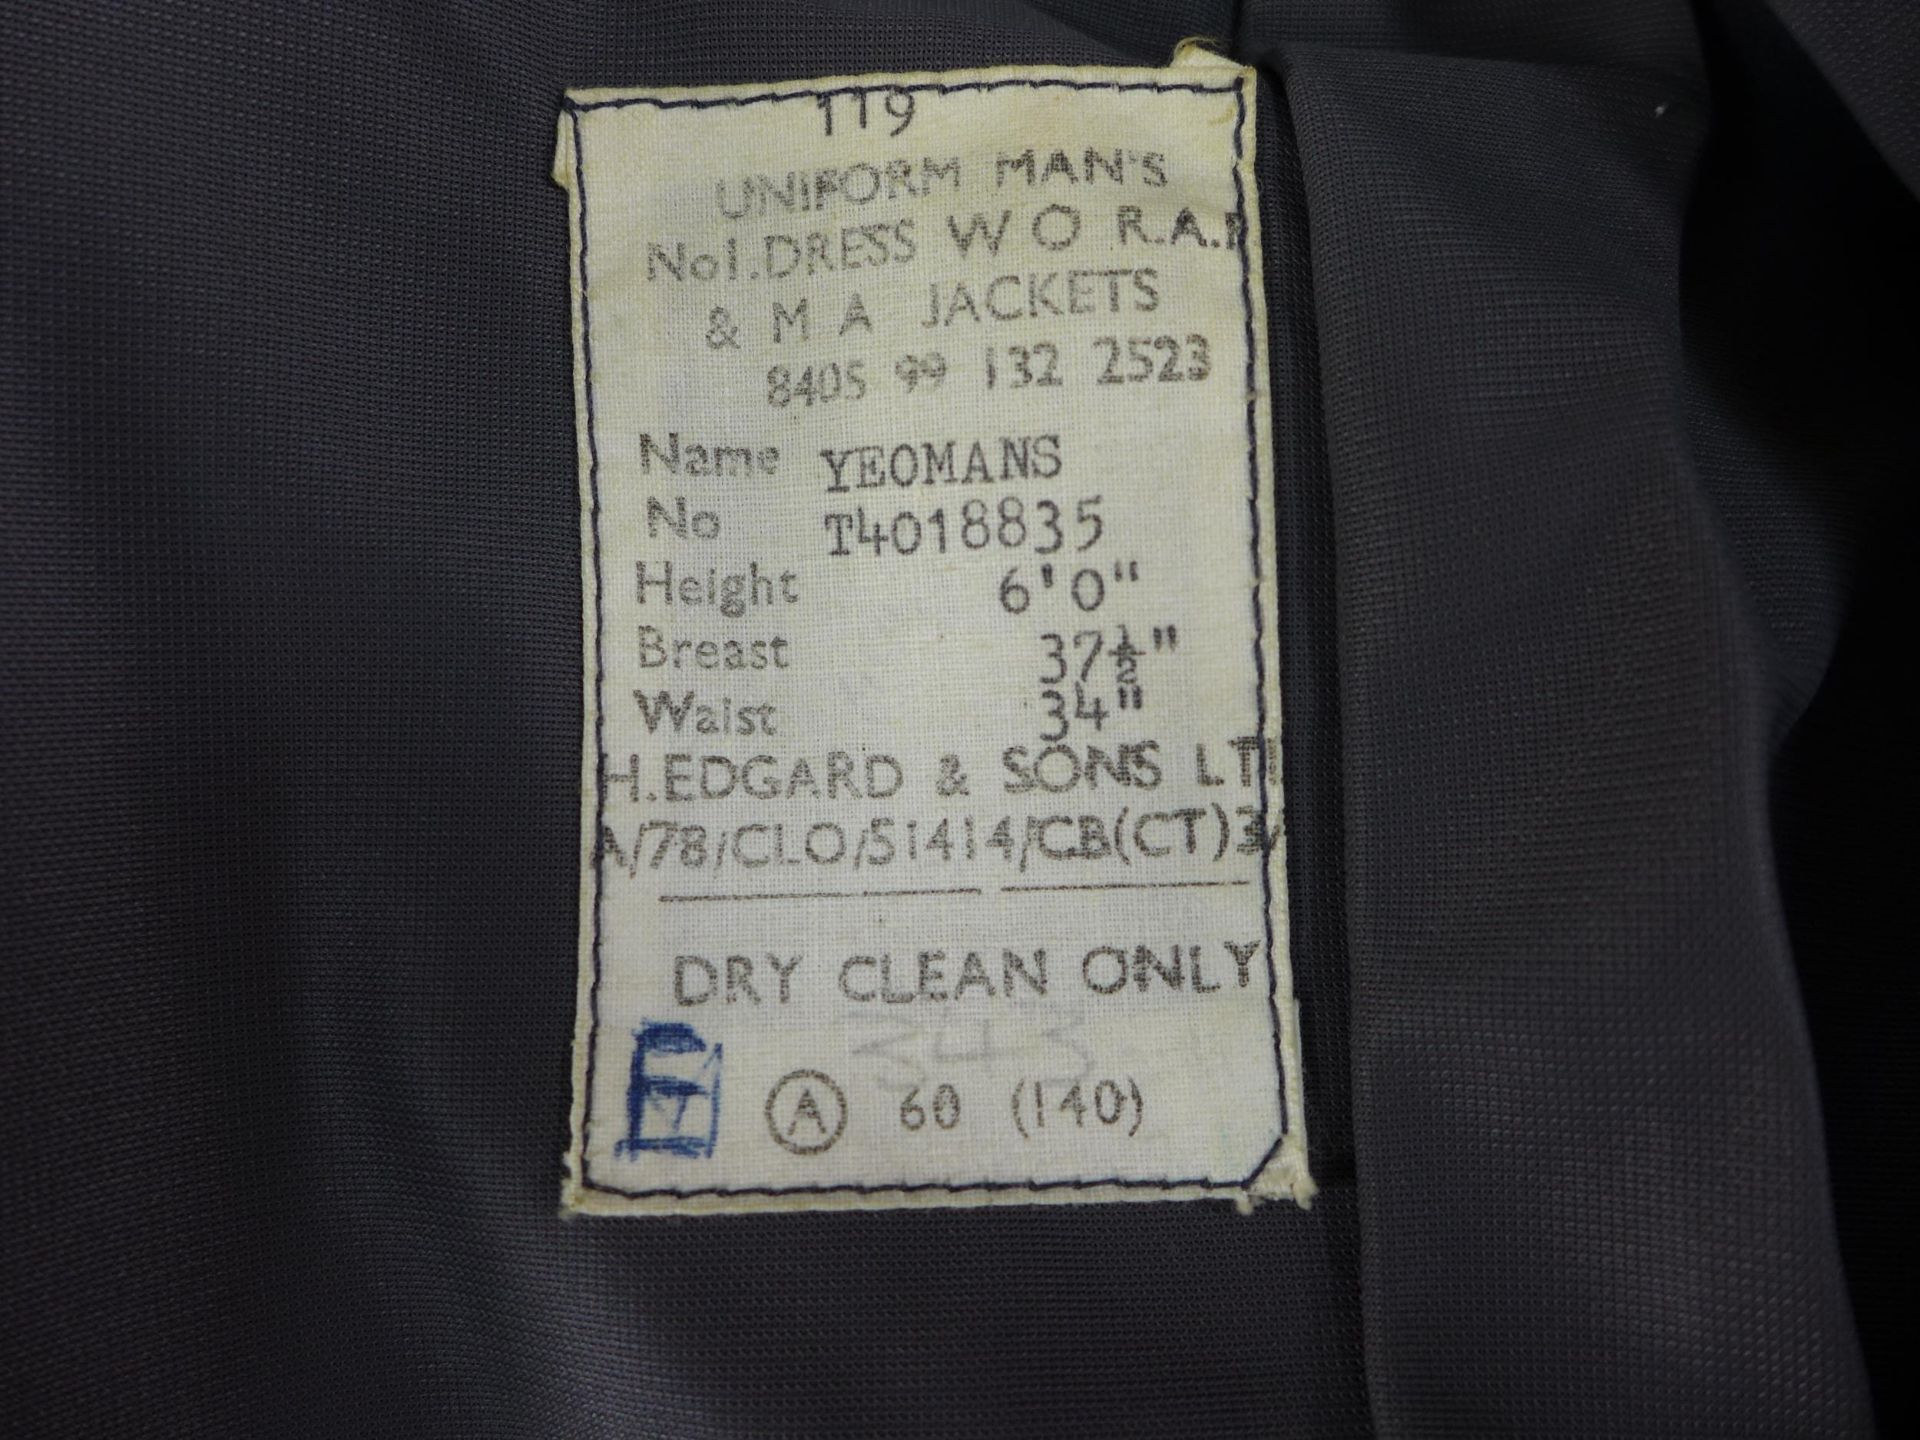 A RAF NO.1 DRESS WARRANT OFFICERS UNIFORM COMPRISING OF A JACKET AND TROUSERS, SEE IMAGE FOR SIZE - Image 3 of 3